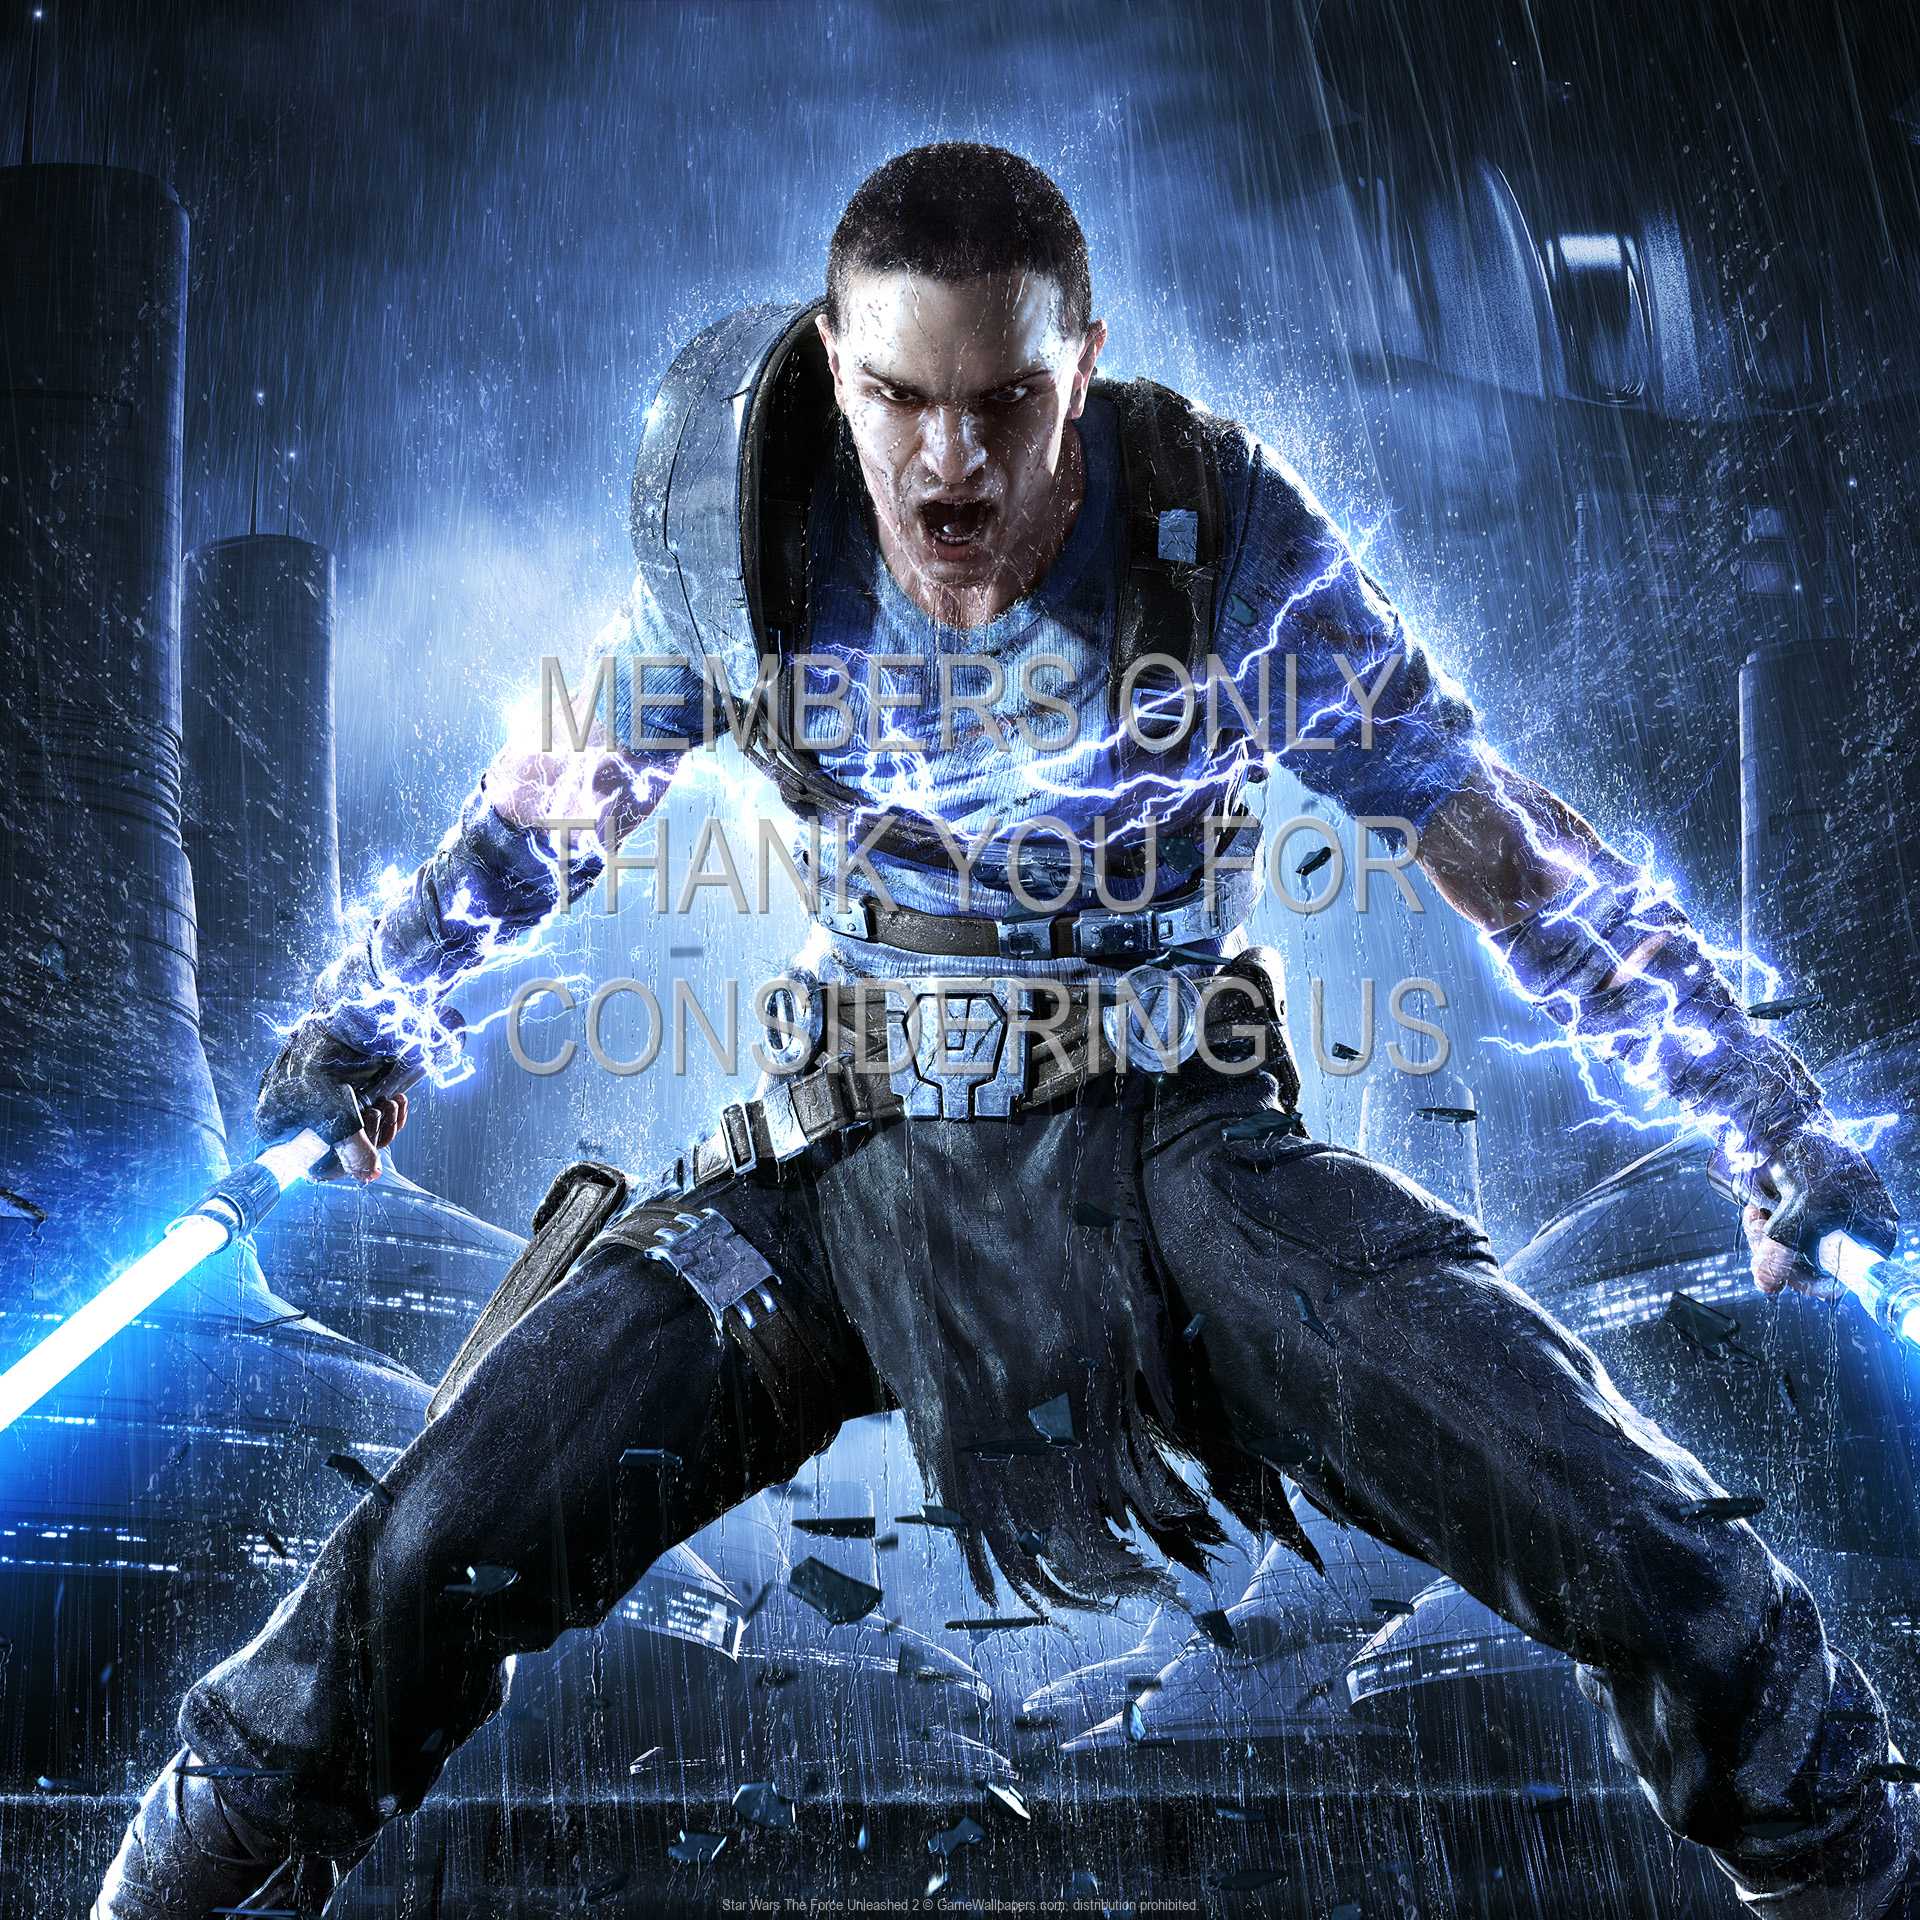 Star Wars: The Force Unleashed 2 1080p Horizontal Mobile fond d'cran 03